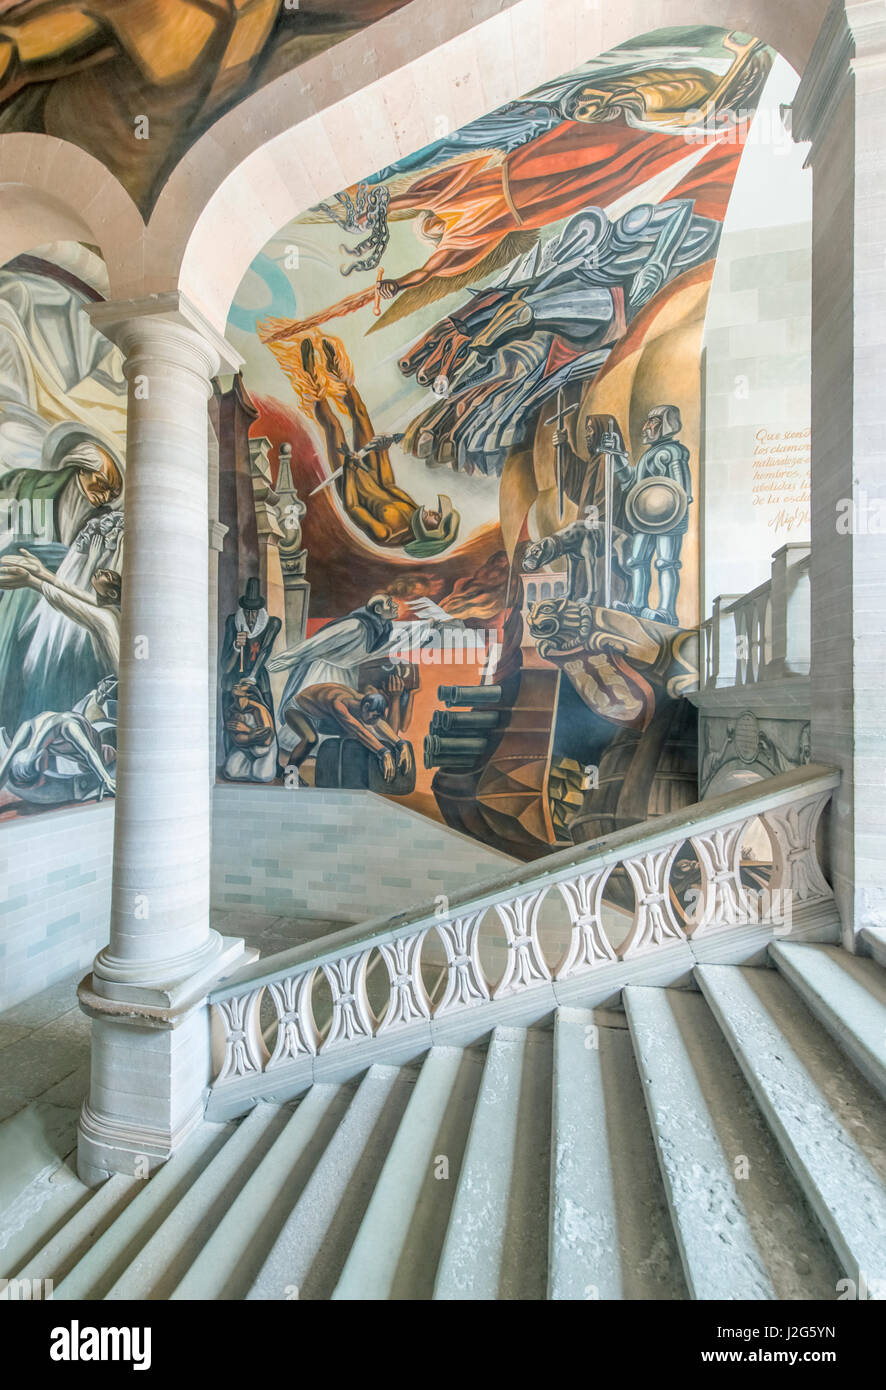 Mexico, Guanajuato, Regional Museum of Guanajuato (Museo Regionale de Guanajuato Alhondiga de Granaditas) Mural by Jose Chavez Morado (Large format sizes available) Stock Photo